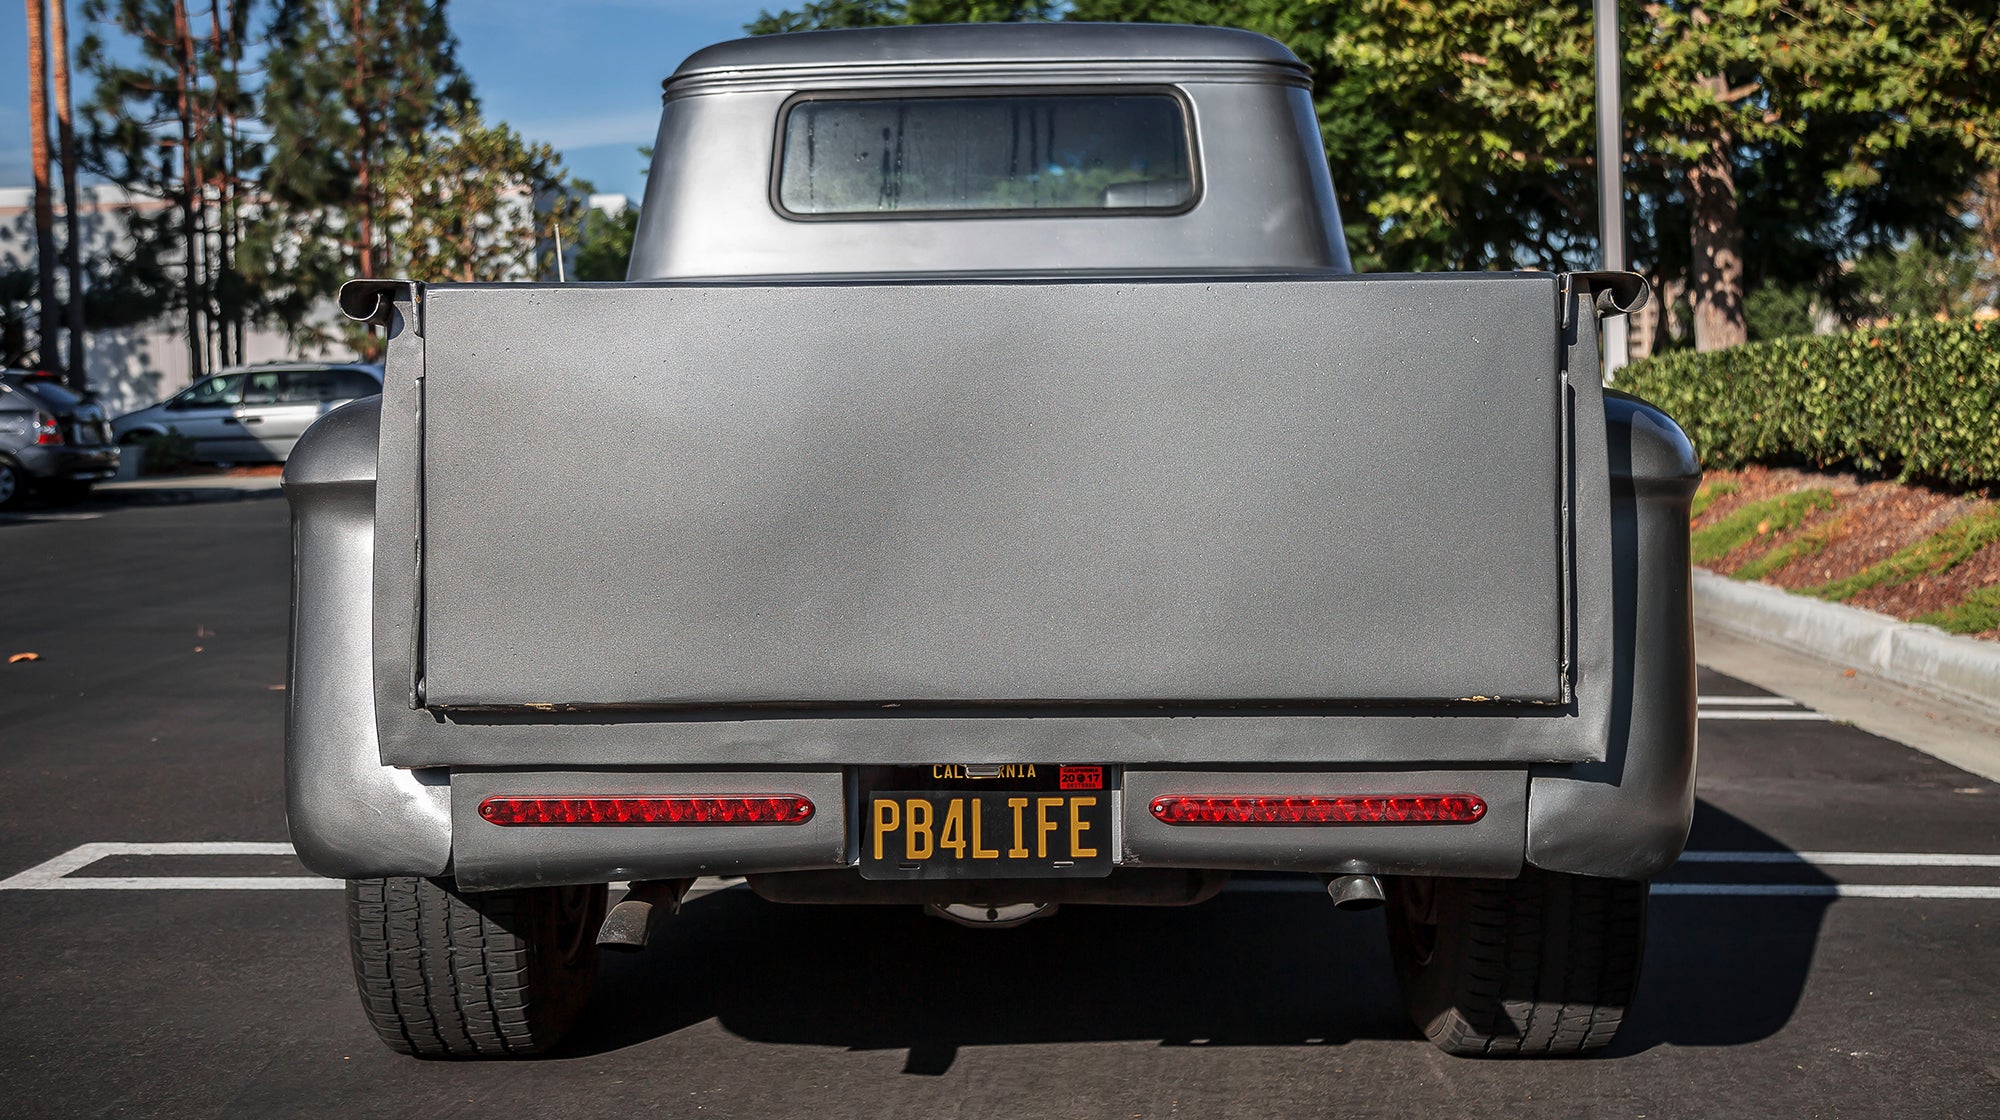 10 Great Gifts for Truck Owners